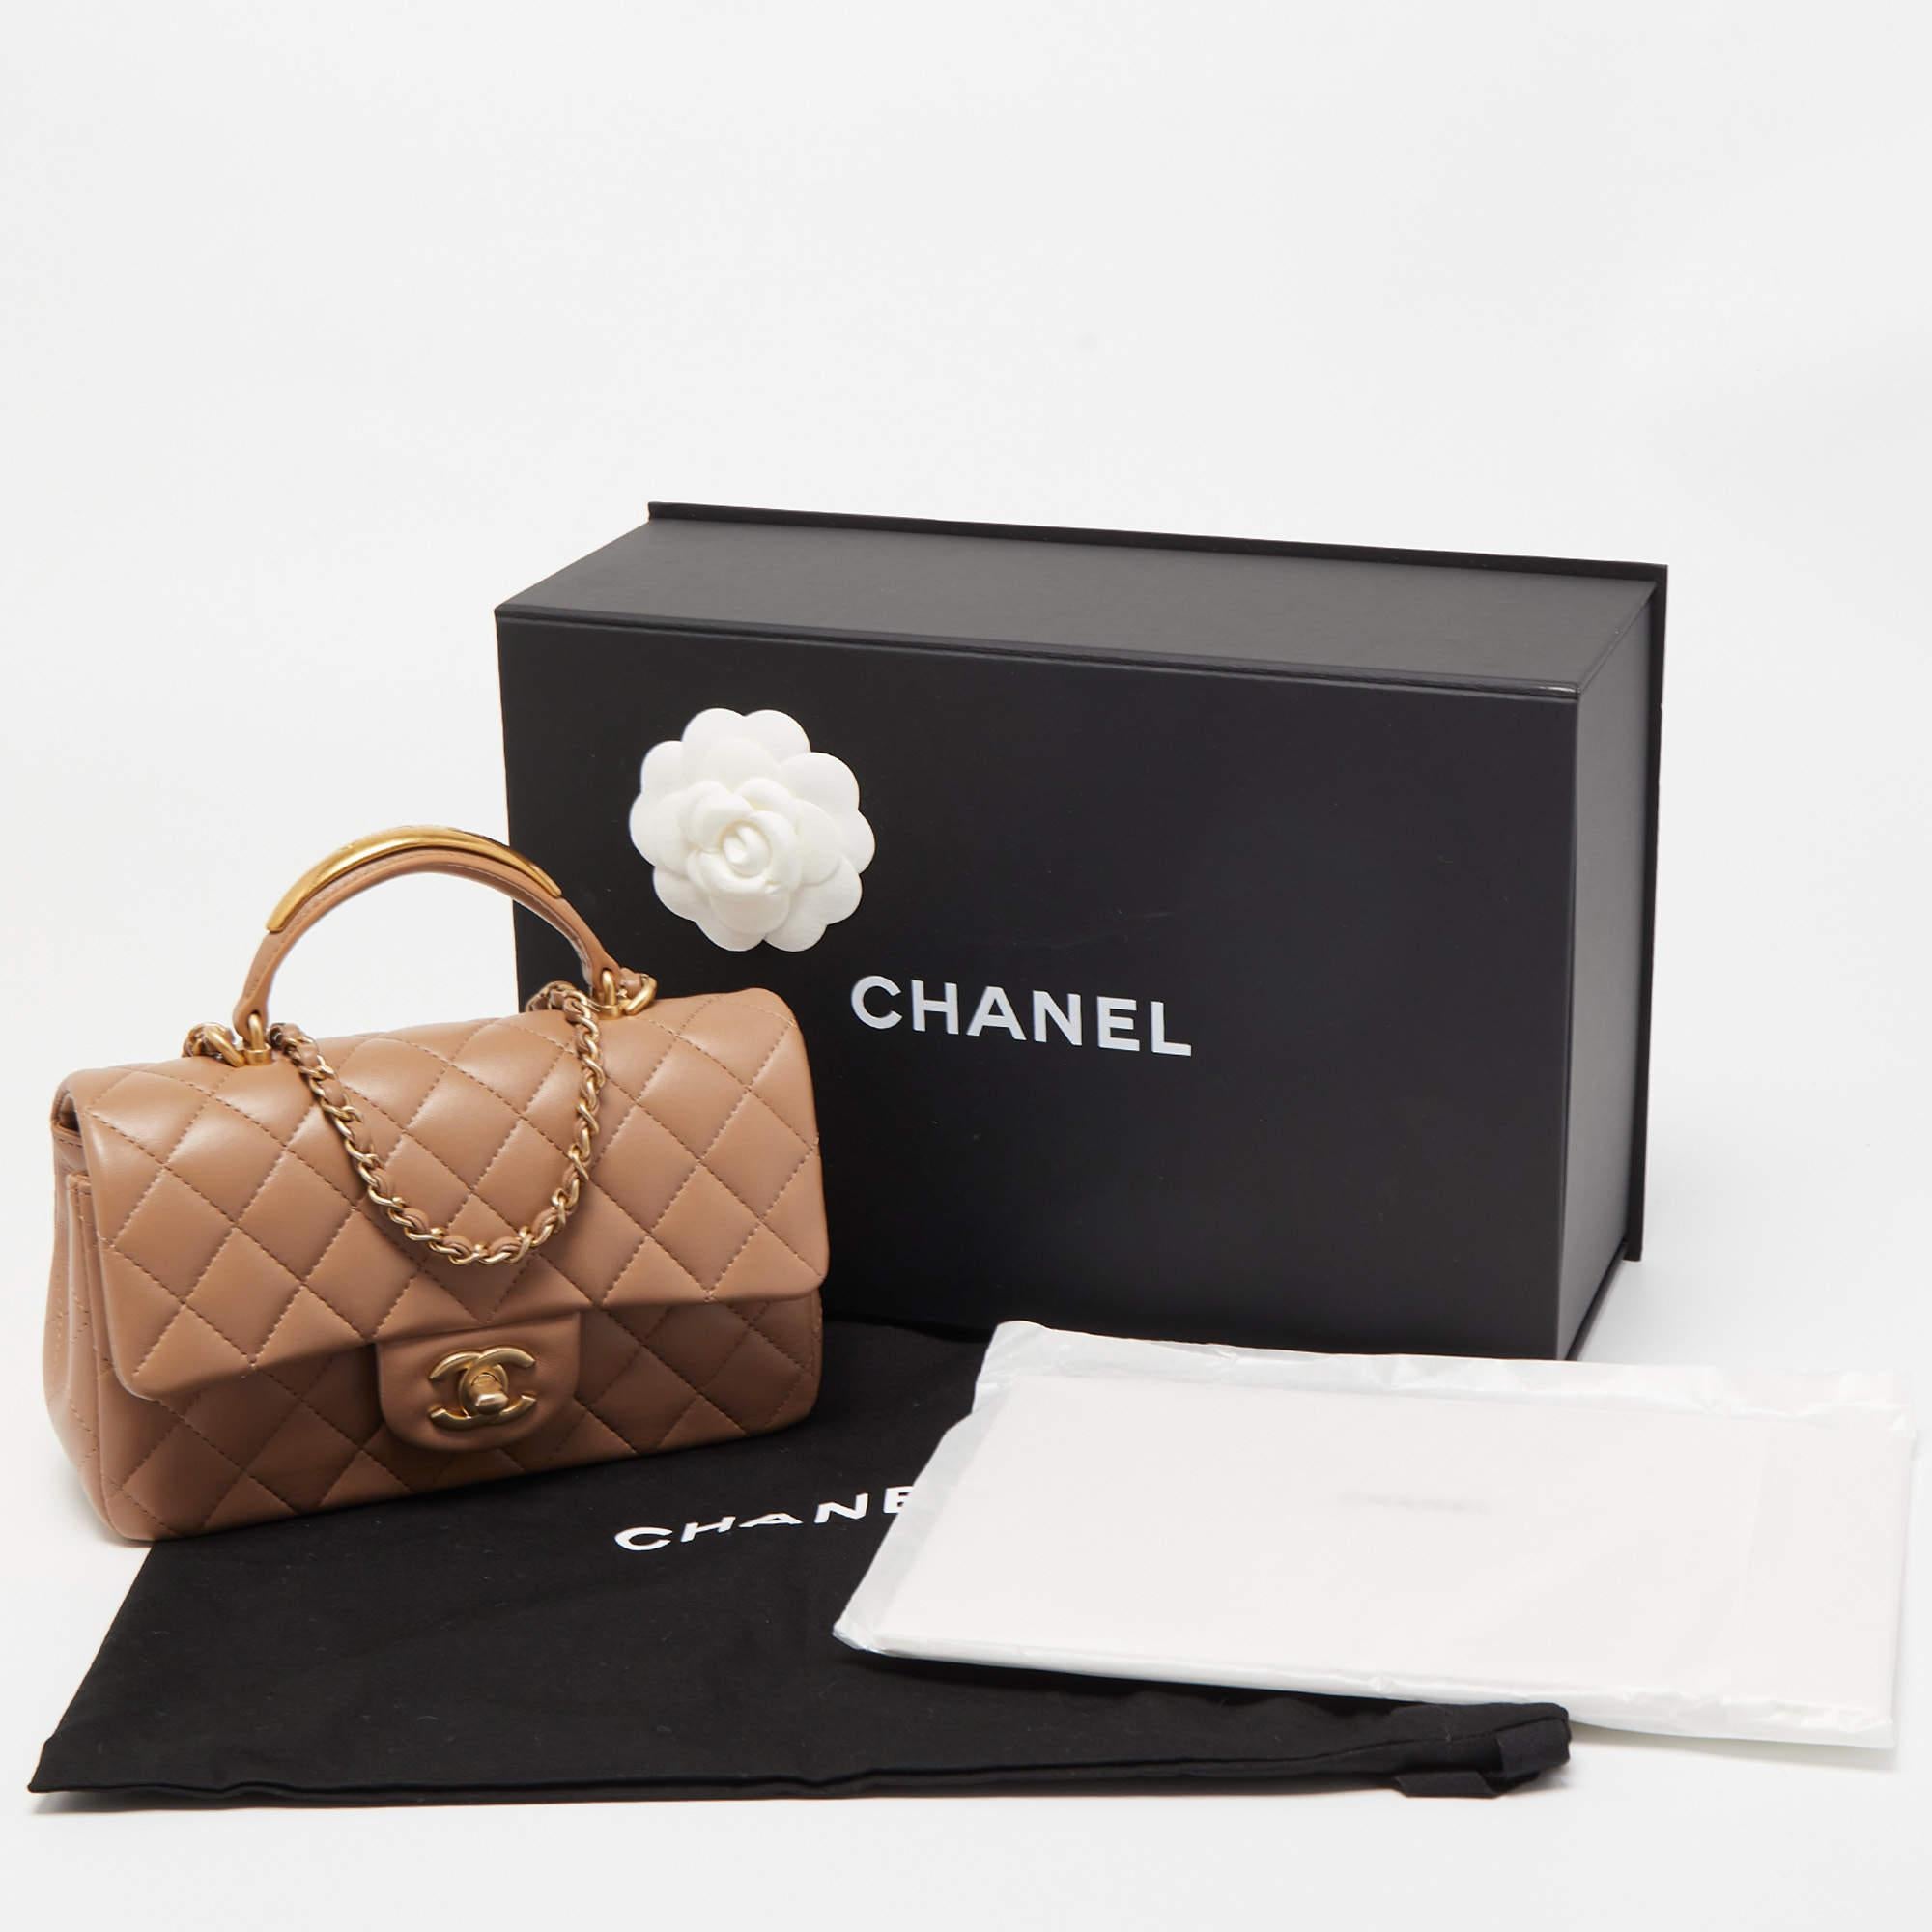 Chanel Caramel Quilted Leather Mini Classic Top Handle Bag 9